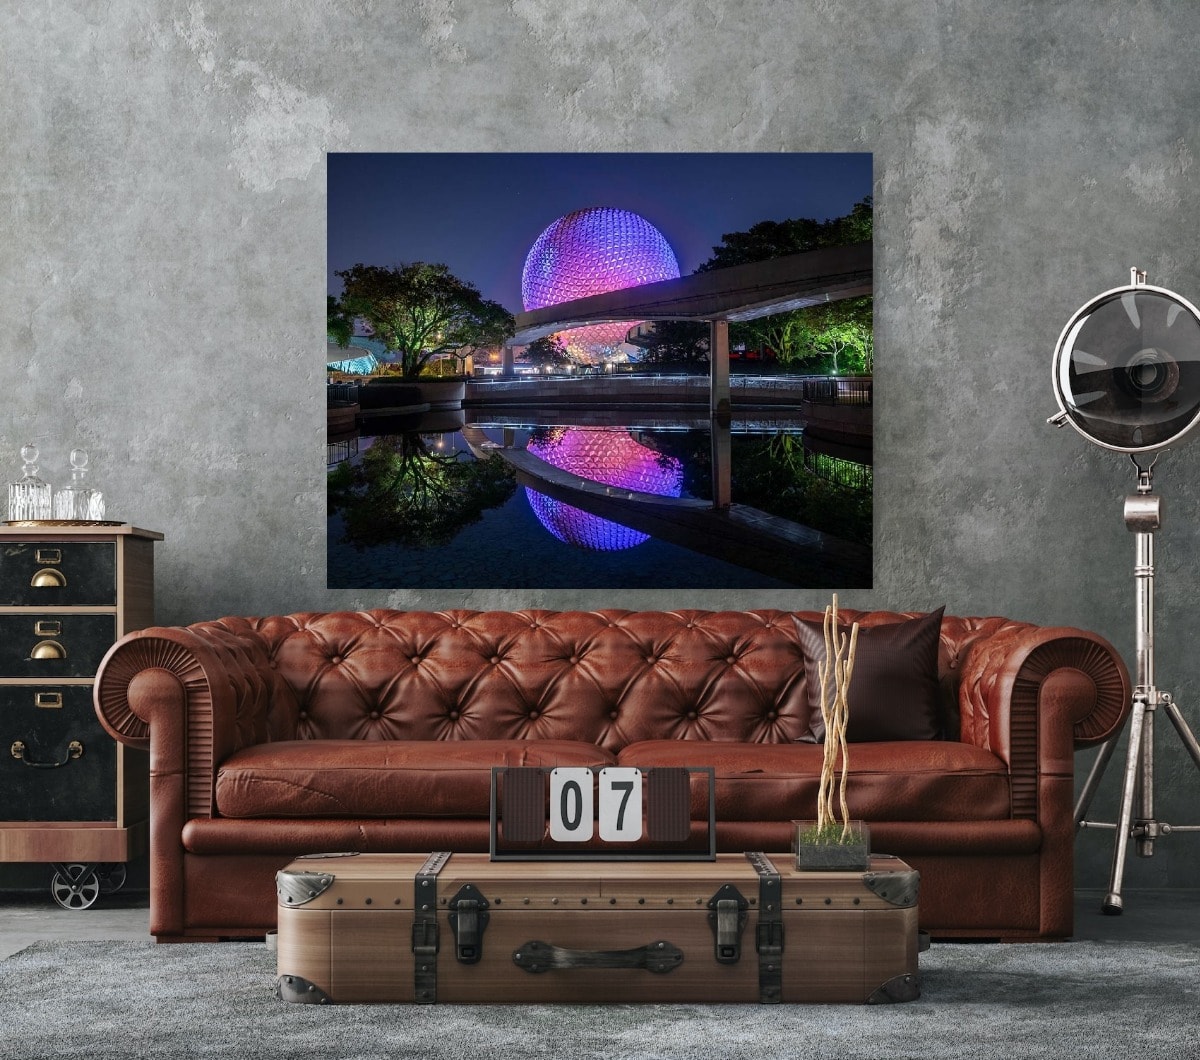 Reflections of Spaceship Earth - Disney Fine Art Photography Galleries | William Drew Photography